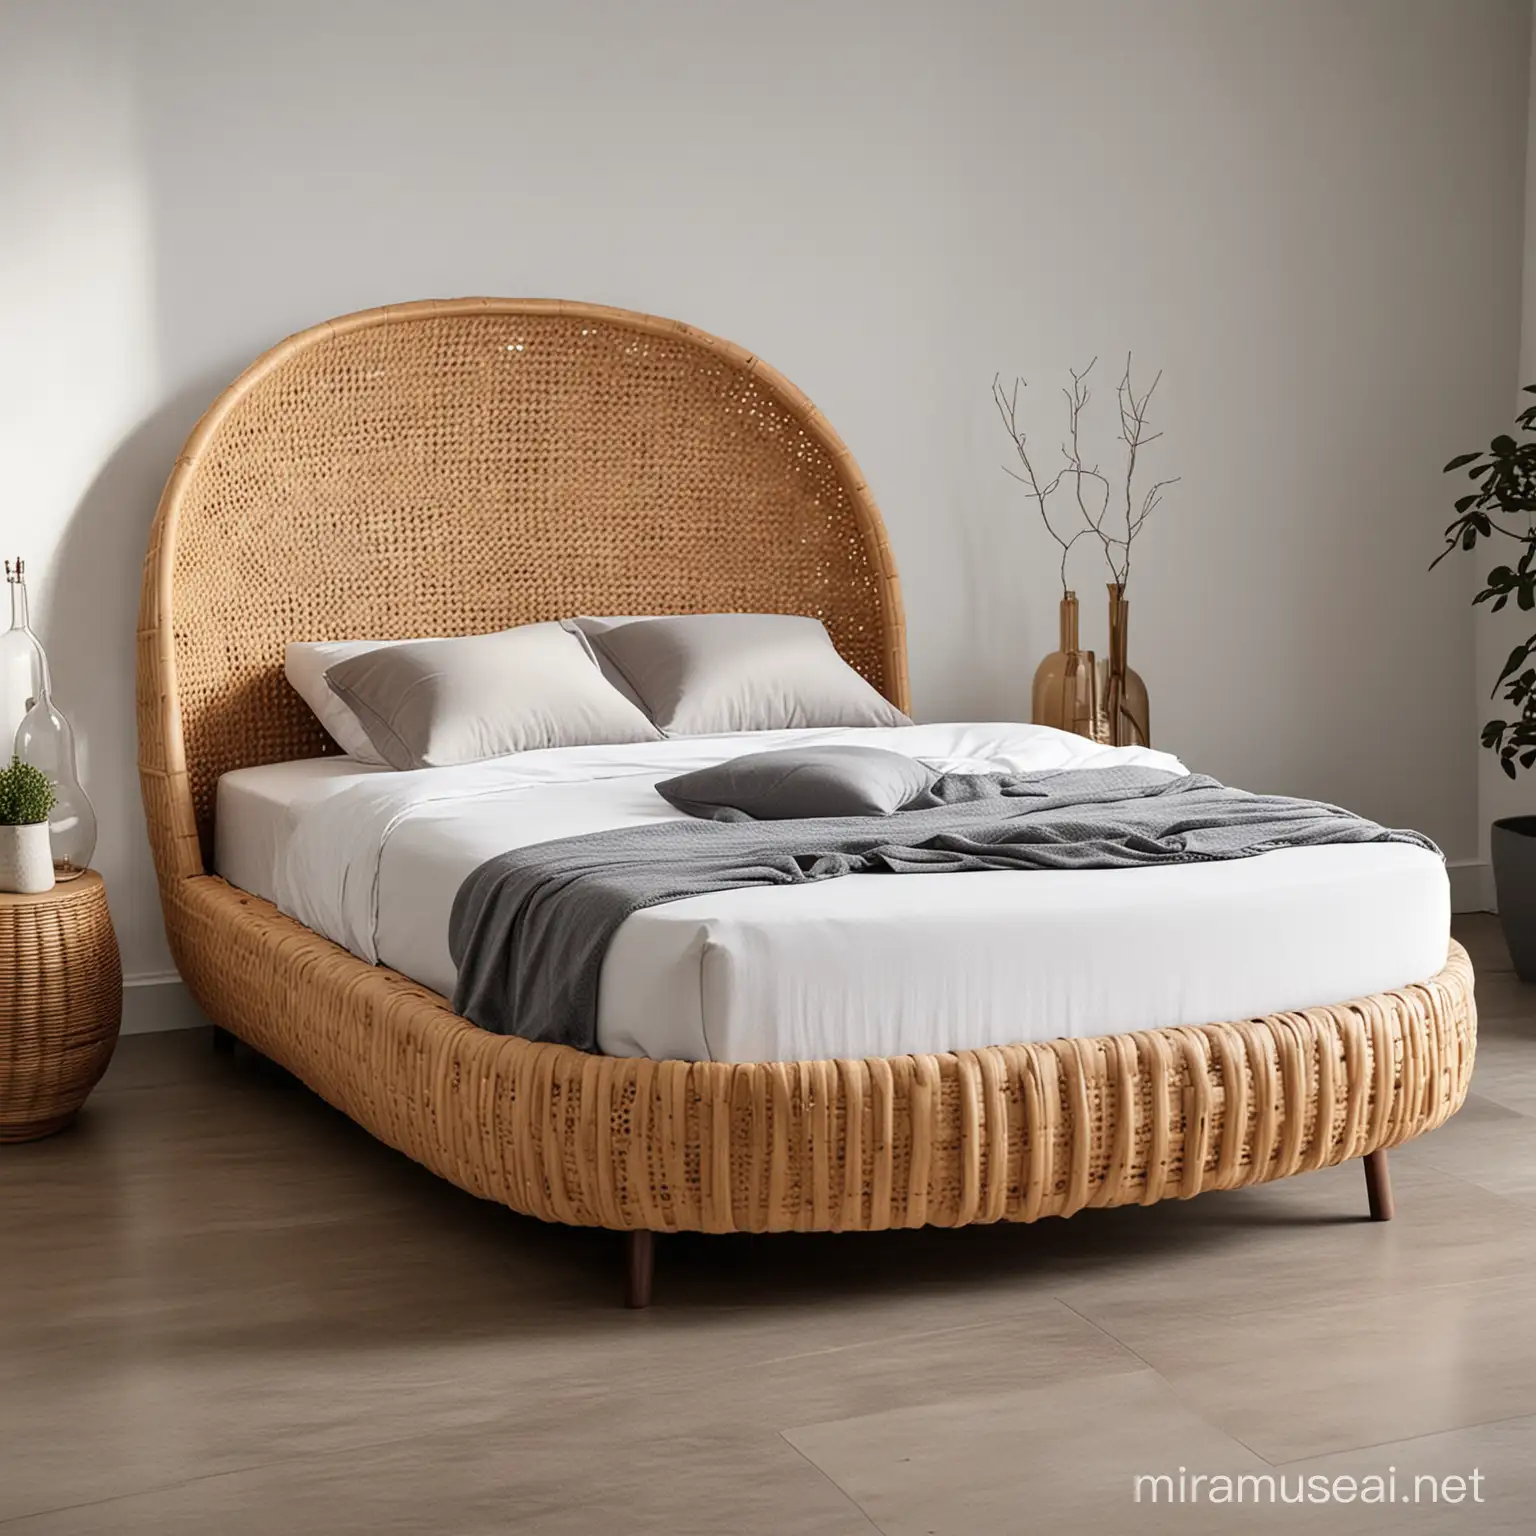 unique and modern single bed with rattan and wood material curved shape